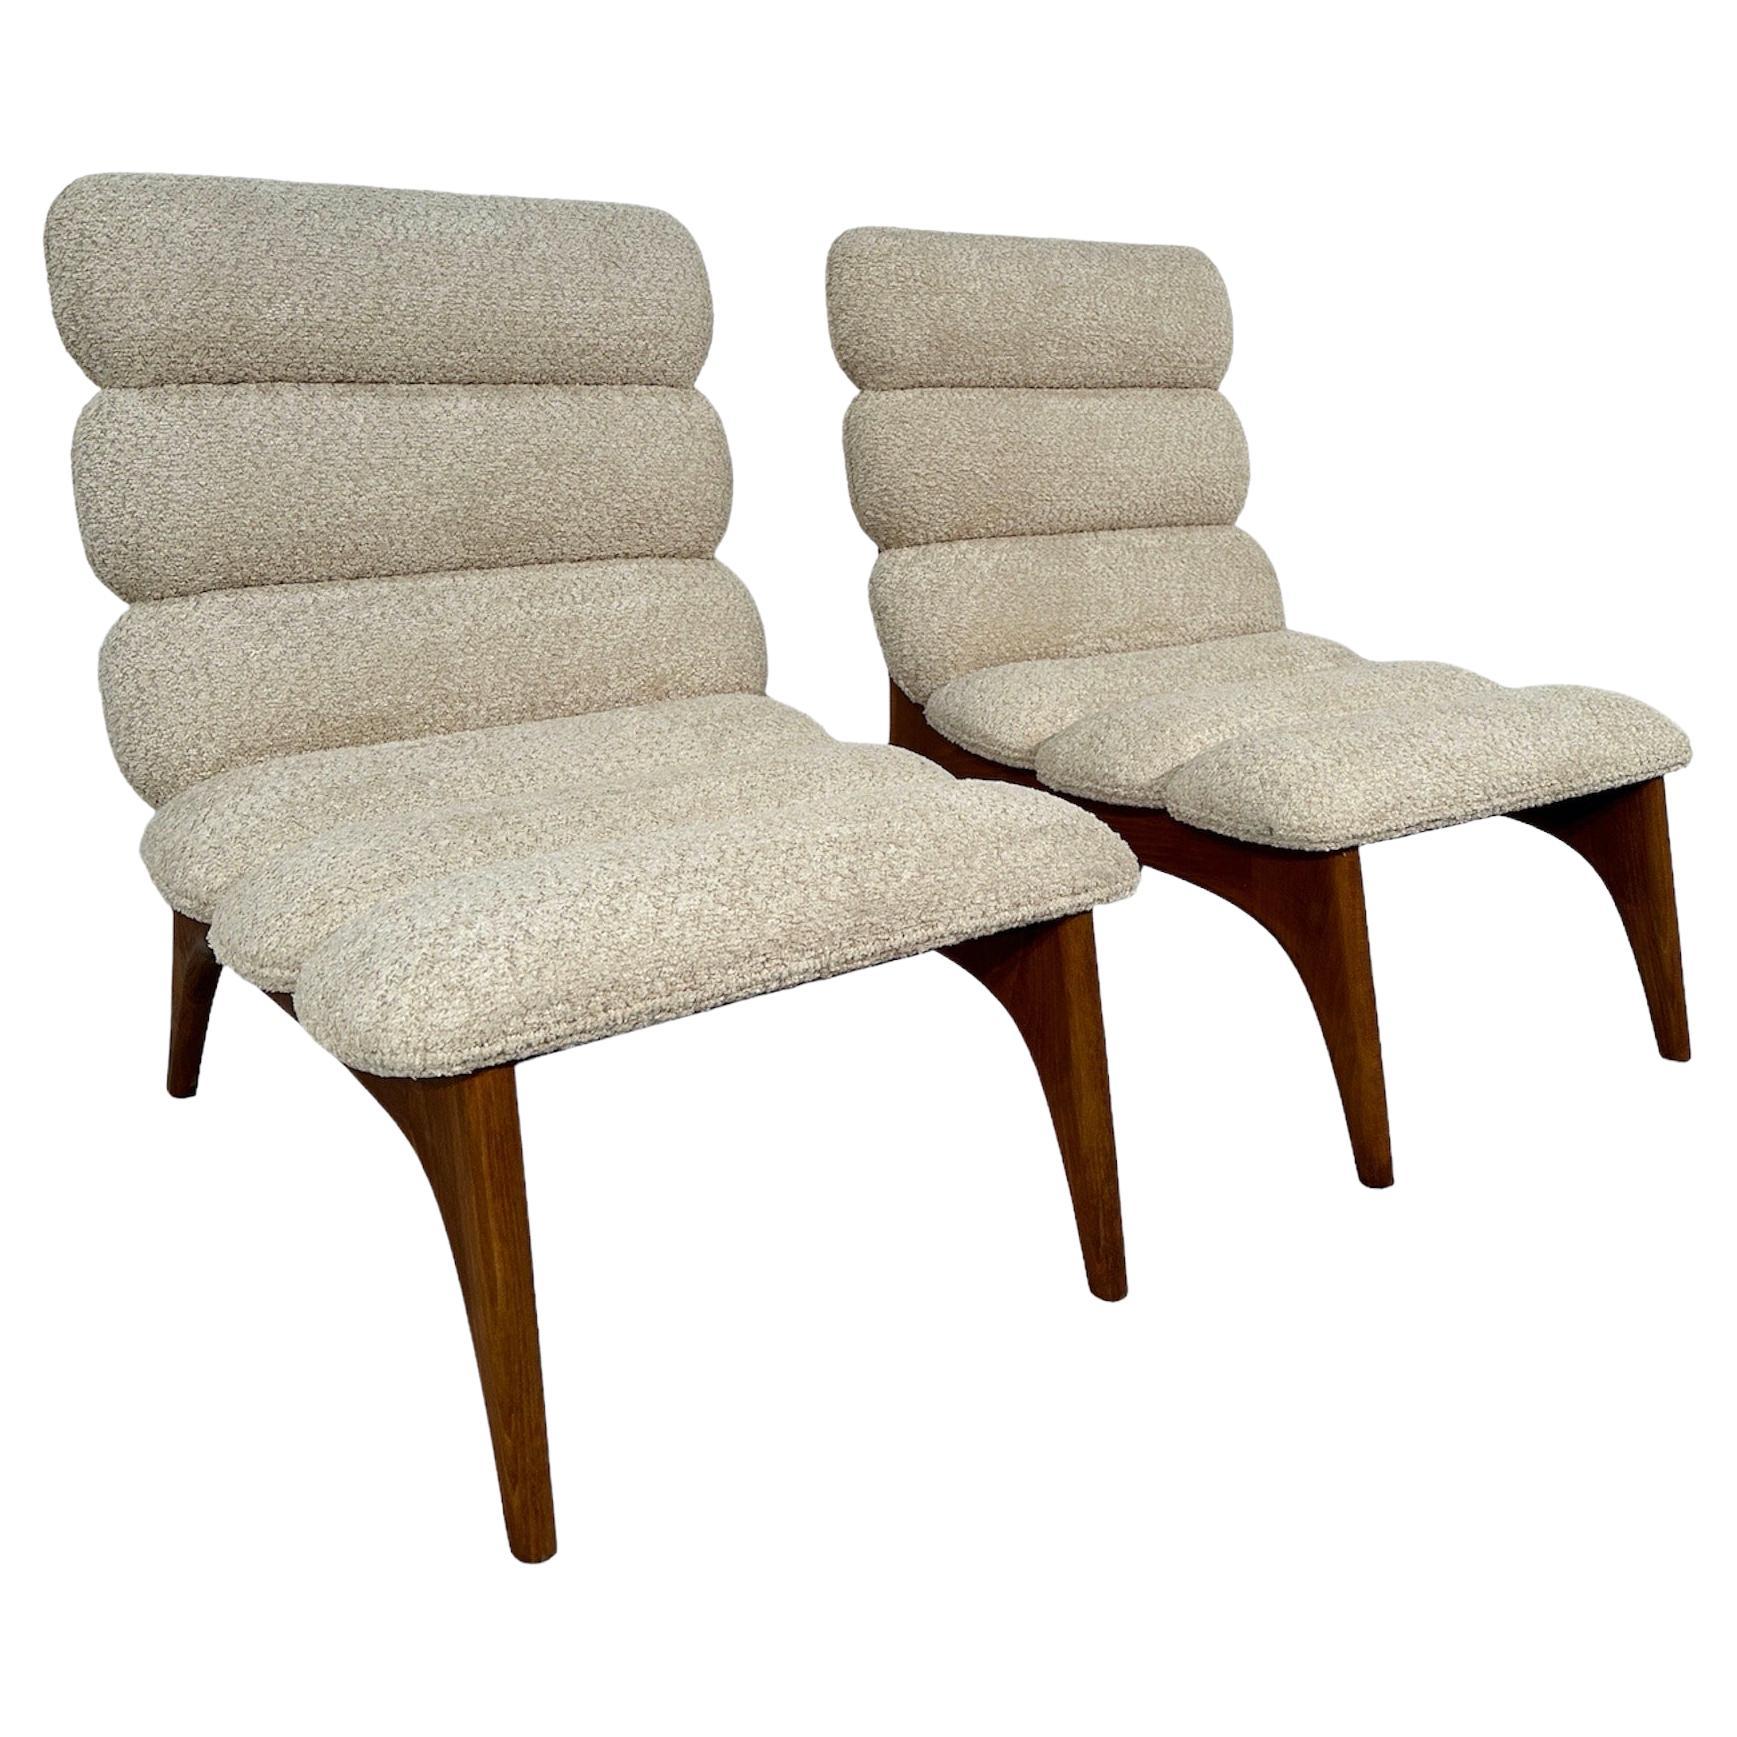 Pair of Mid-Century Modern Danish Lounge Chairs in Boucle Fabric 1980s For Sale